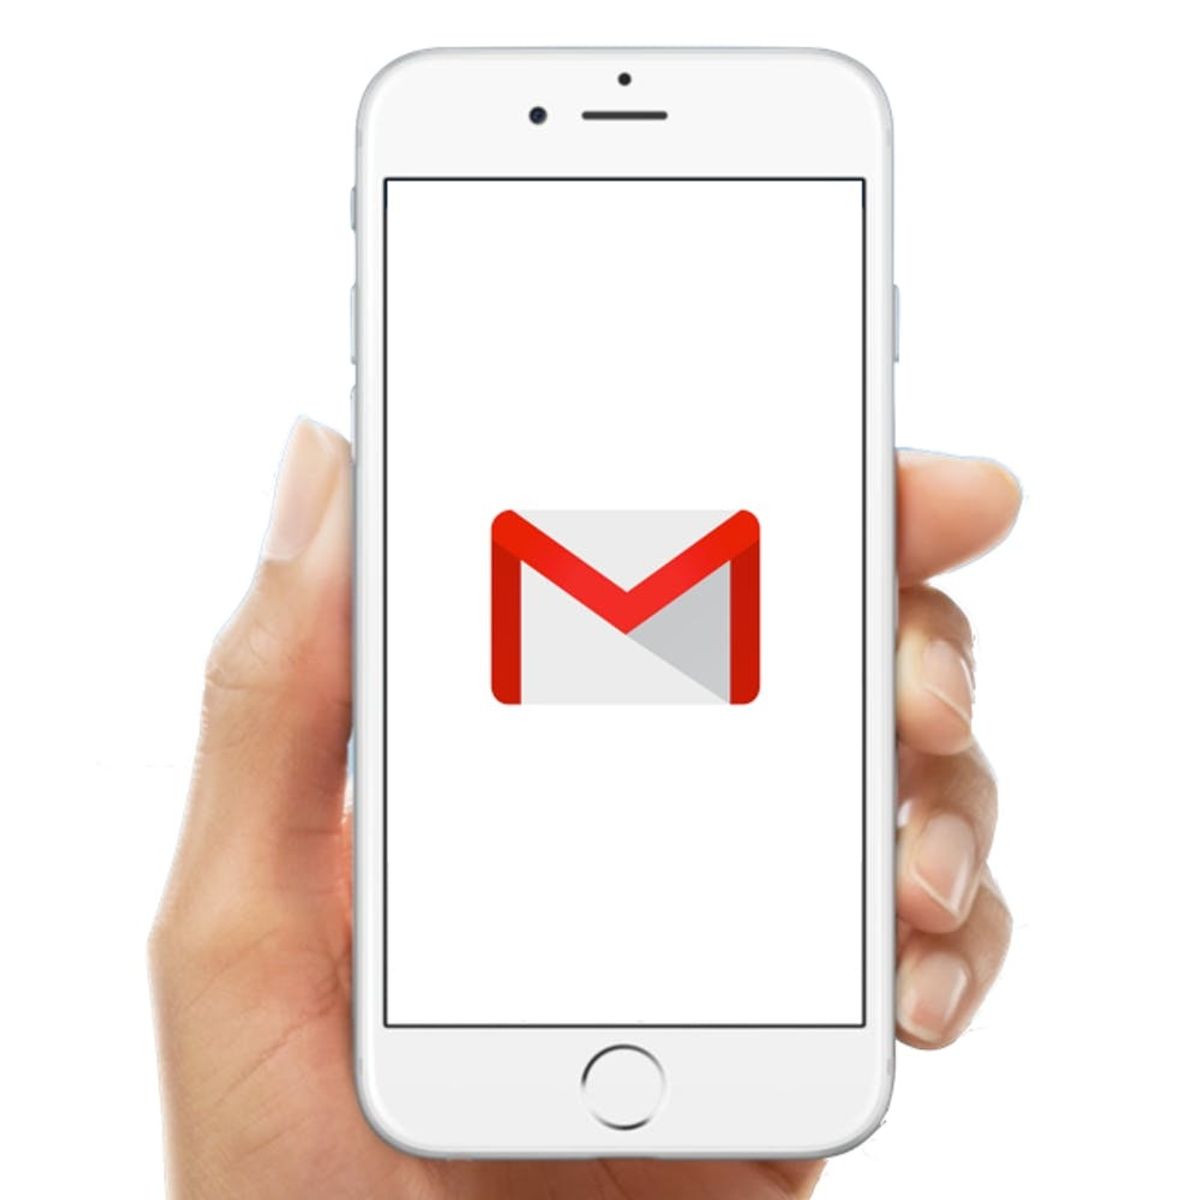 Gmail’s New Feature Will Make Your Life a LOT Closer to “Her”